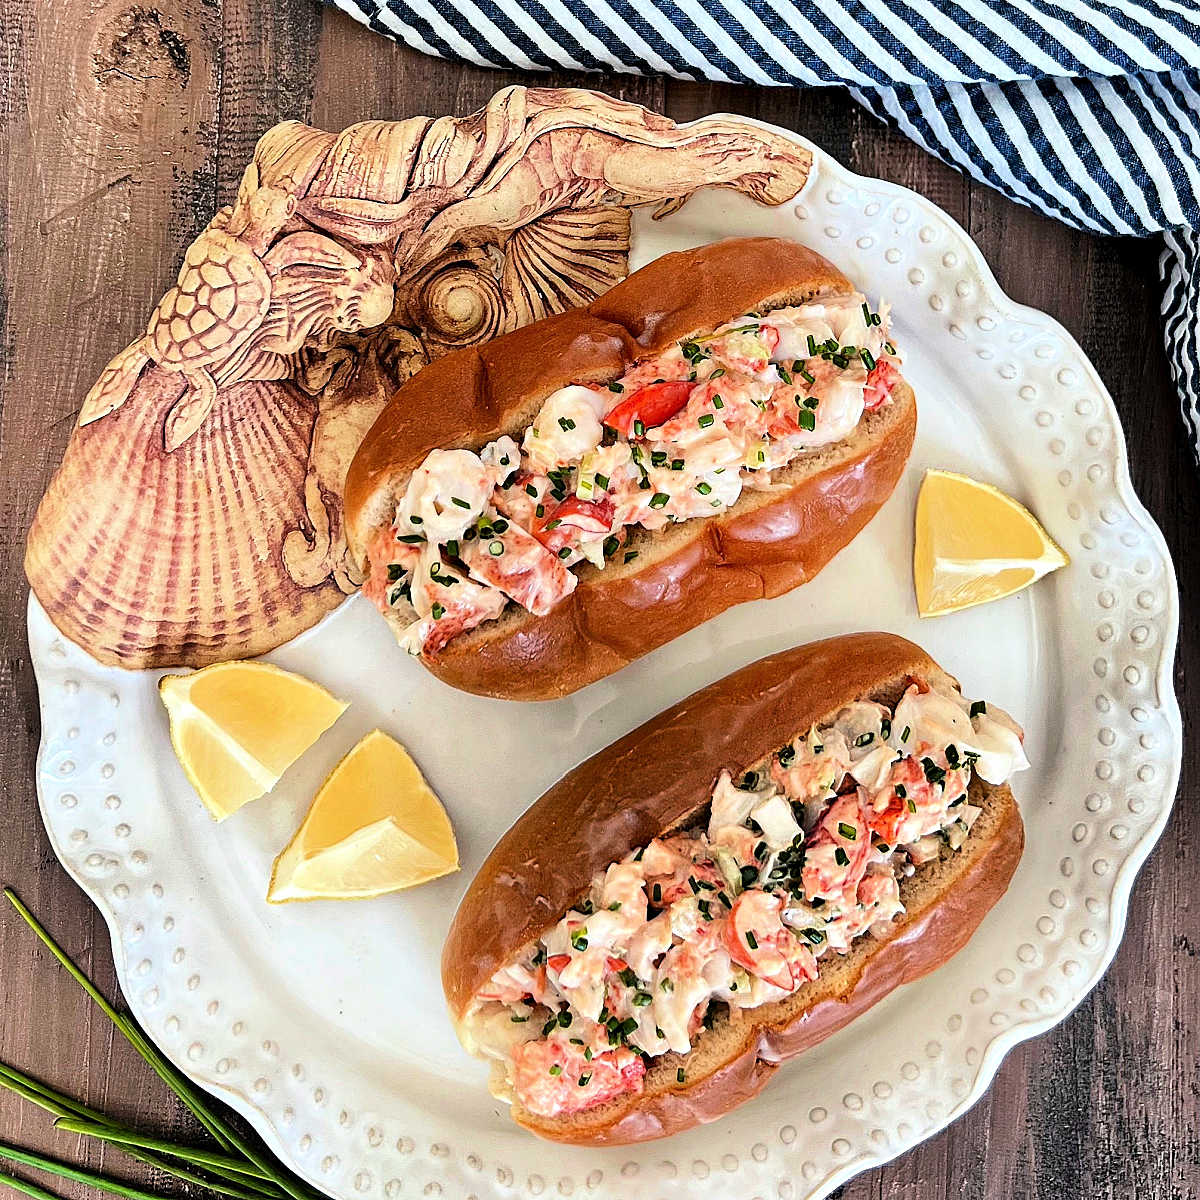 Two lobster rolls on a white plate with lemon wedges.